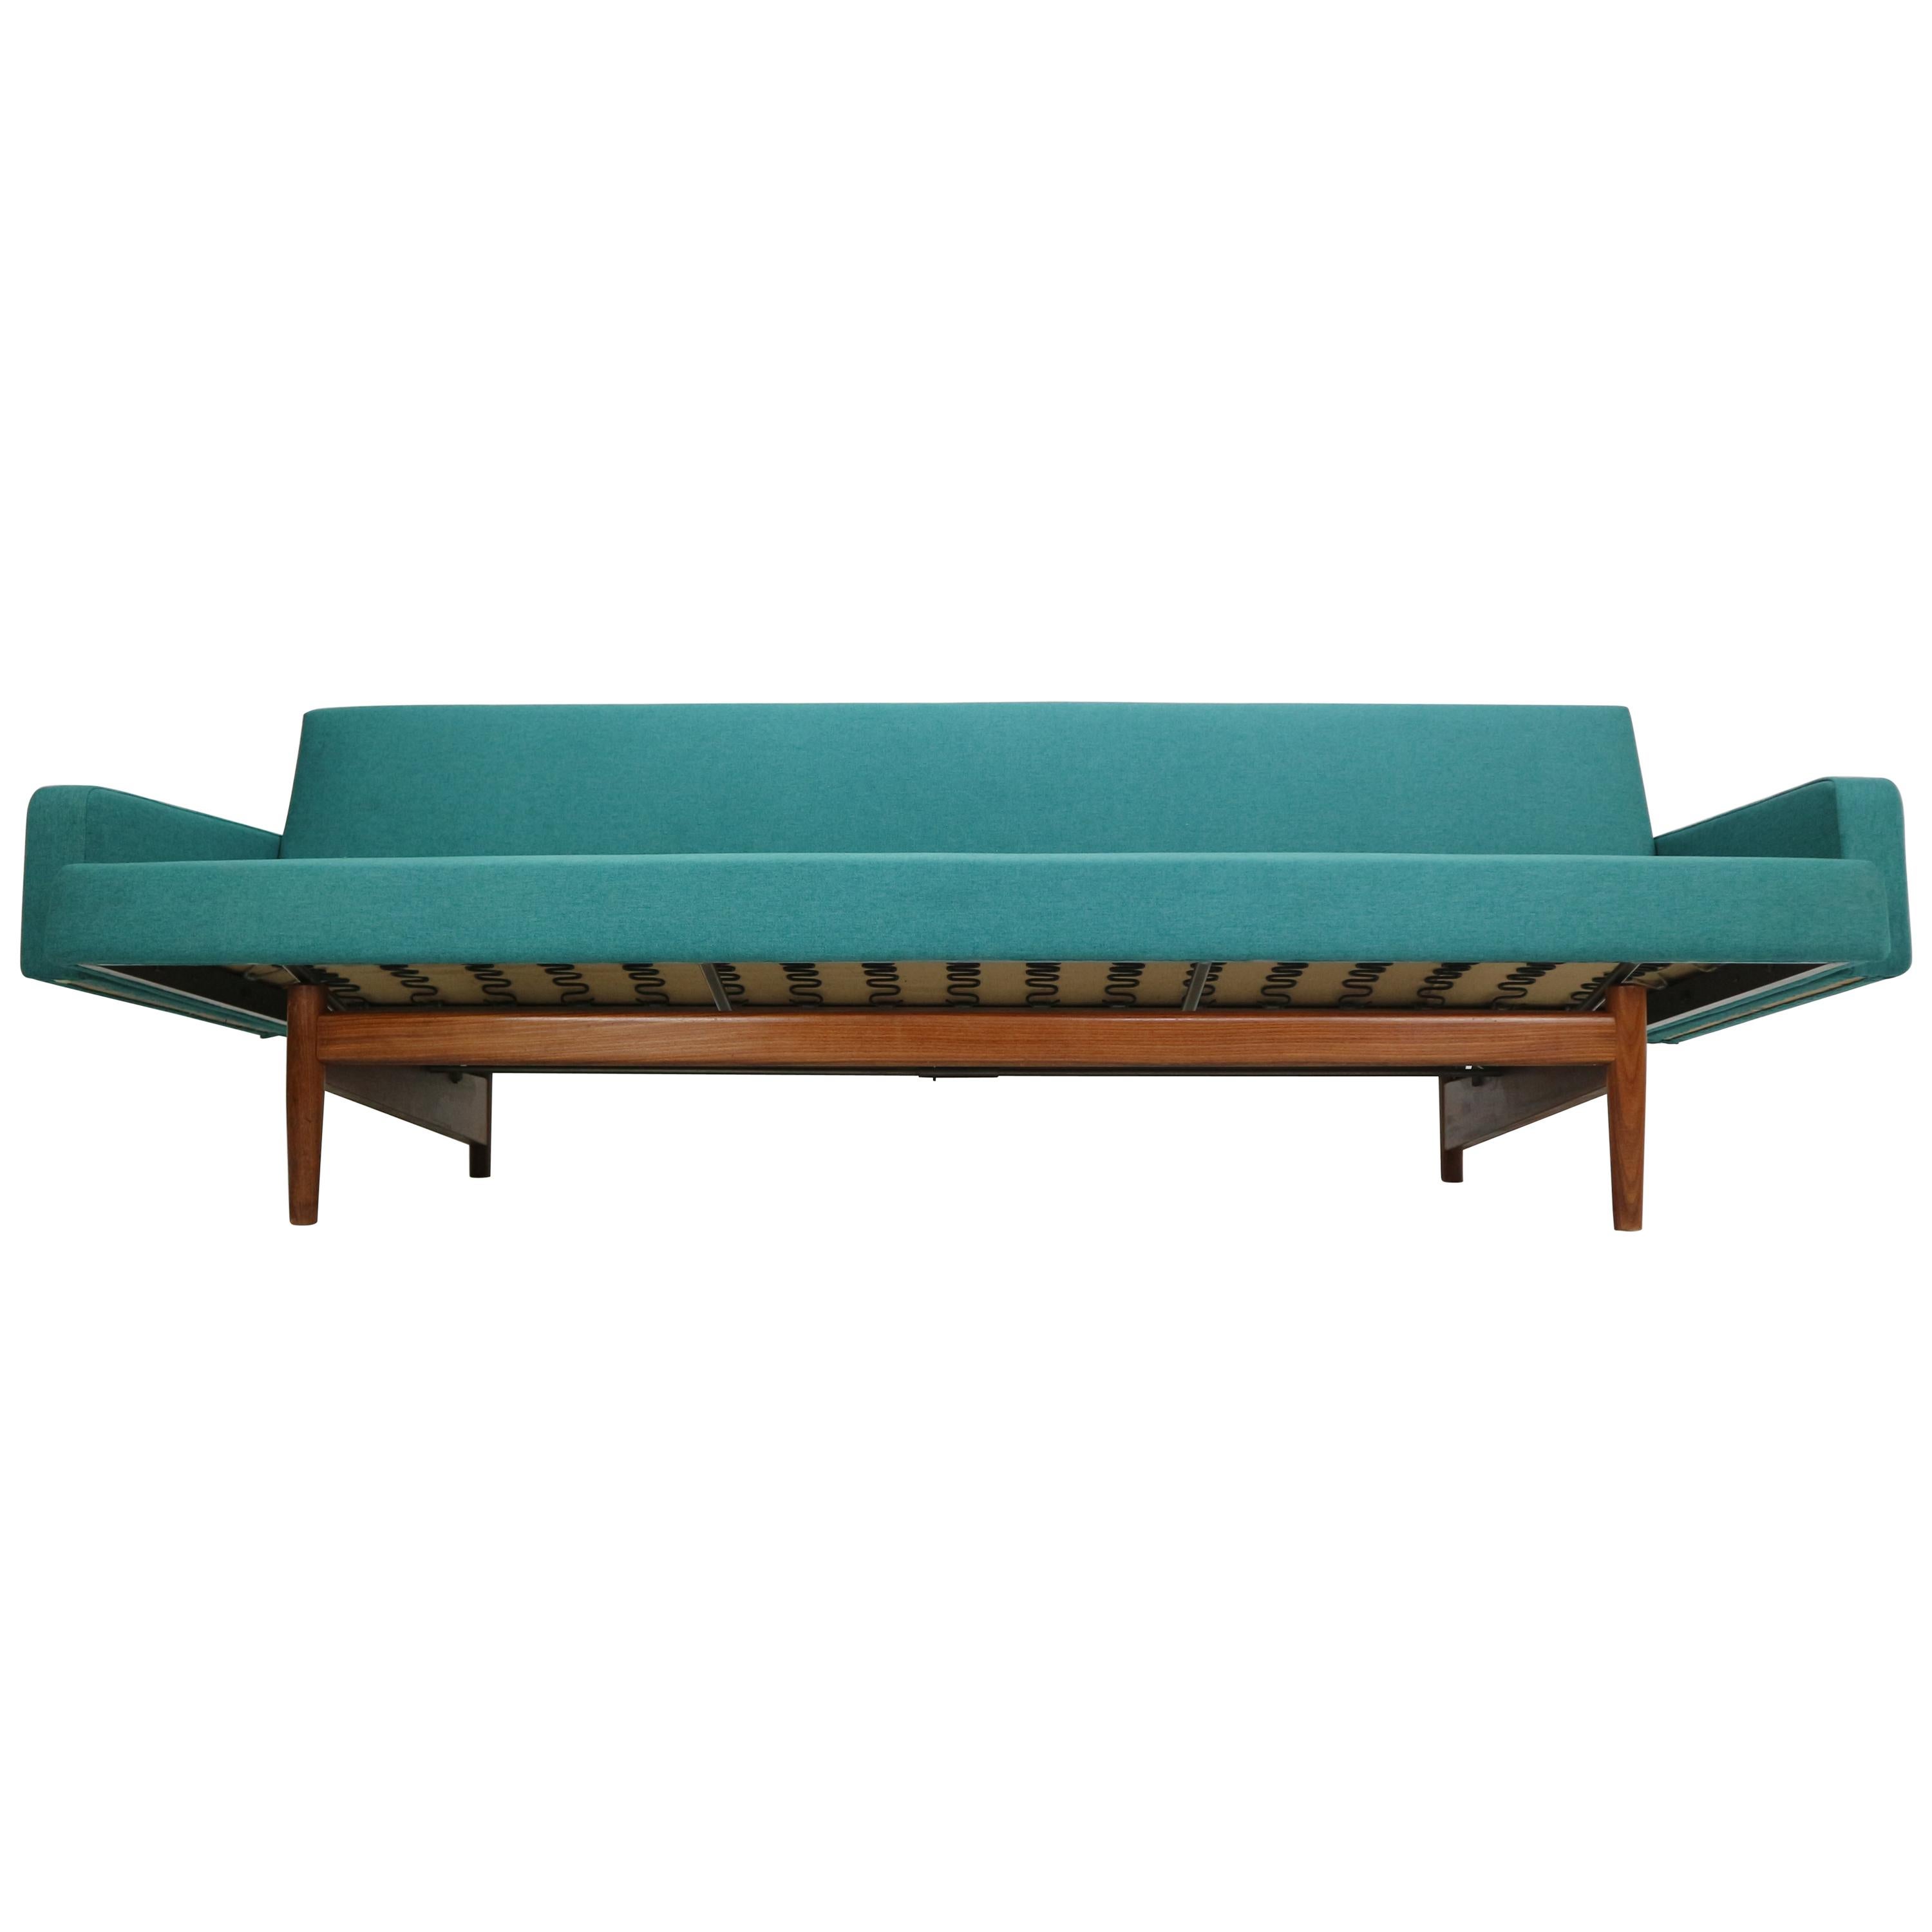 Rare sofa designed by Rob Parry for Gelderland, 1960s.
Minimalistic and elegant Dutch design pride.
With one movement, the seat can be pulled out into a single sofa bed.
Measurements: 89cm.
This sofa bed has a teak elegant base and is